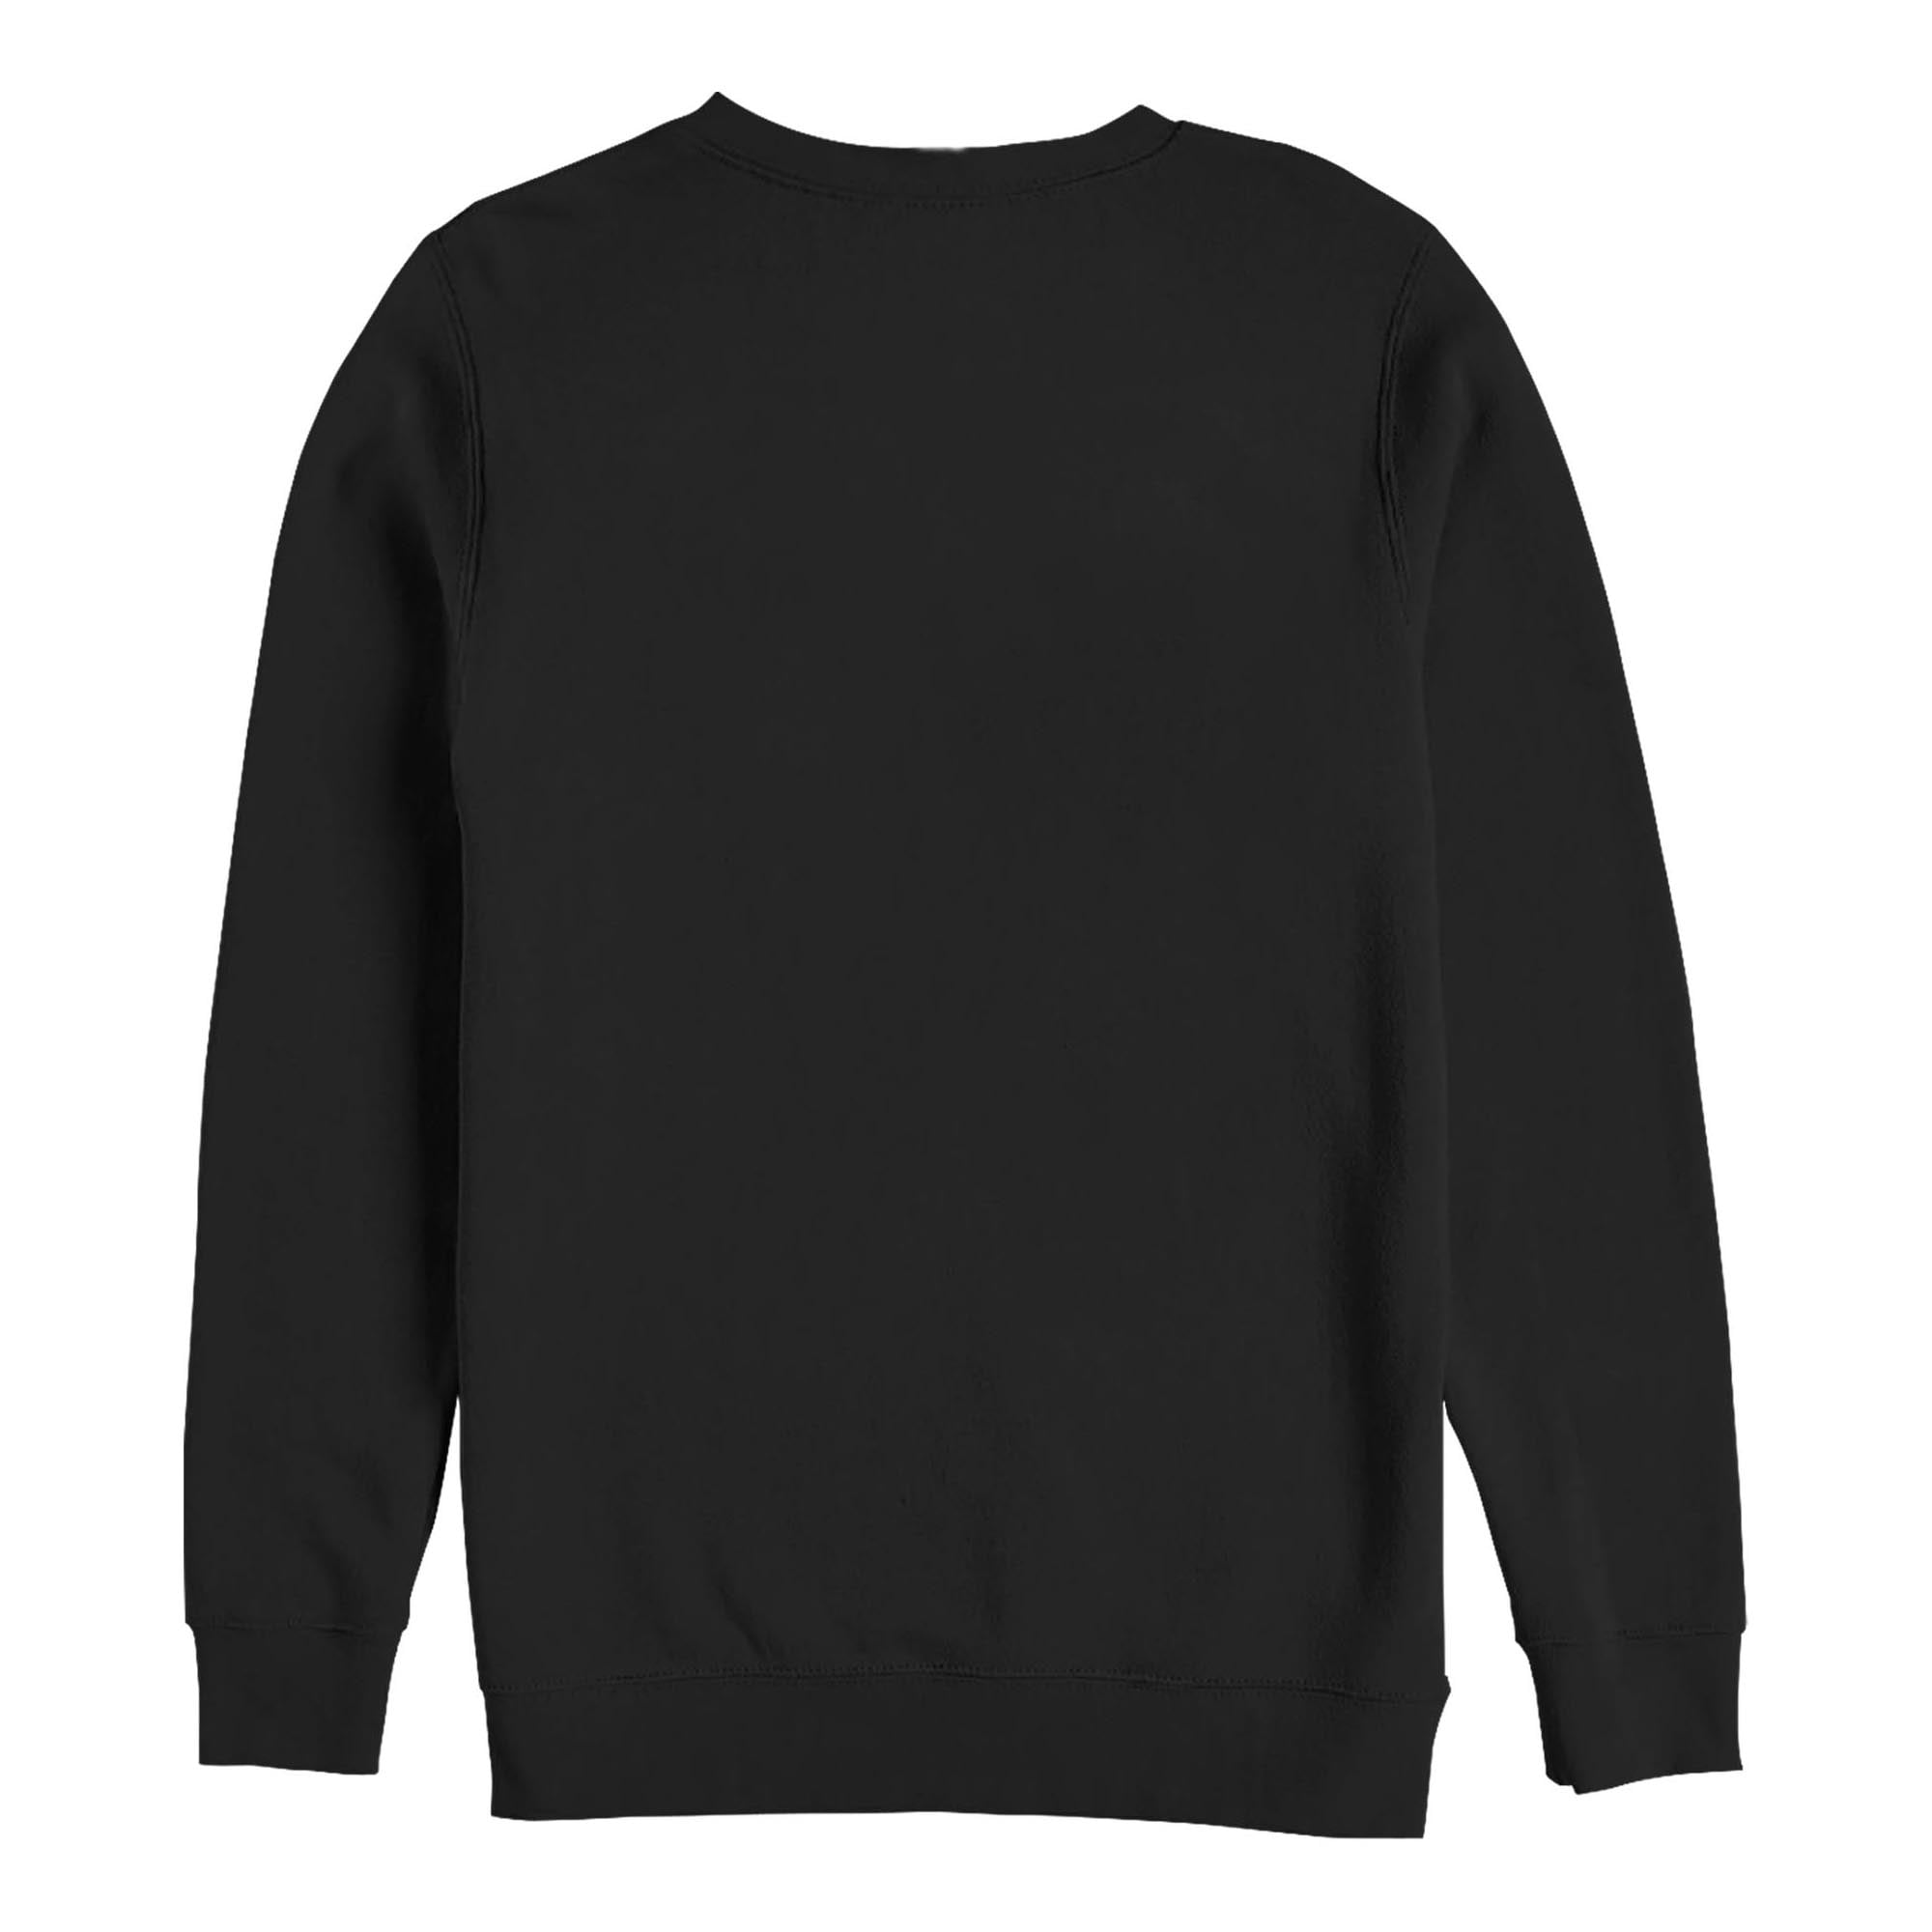 Hunting For Colors Black Graphic Crew Neck Sweatshirt - Design By